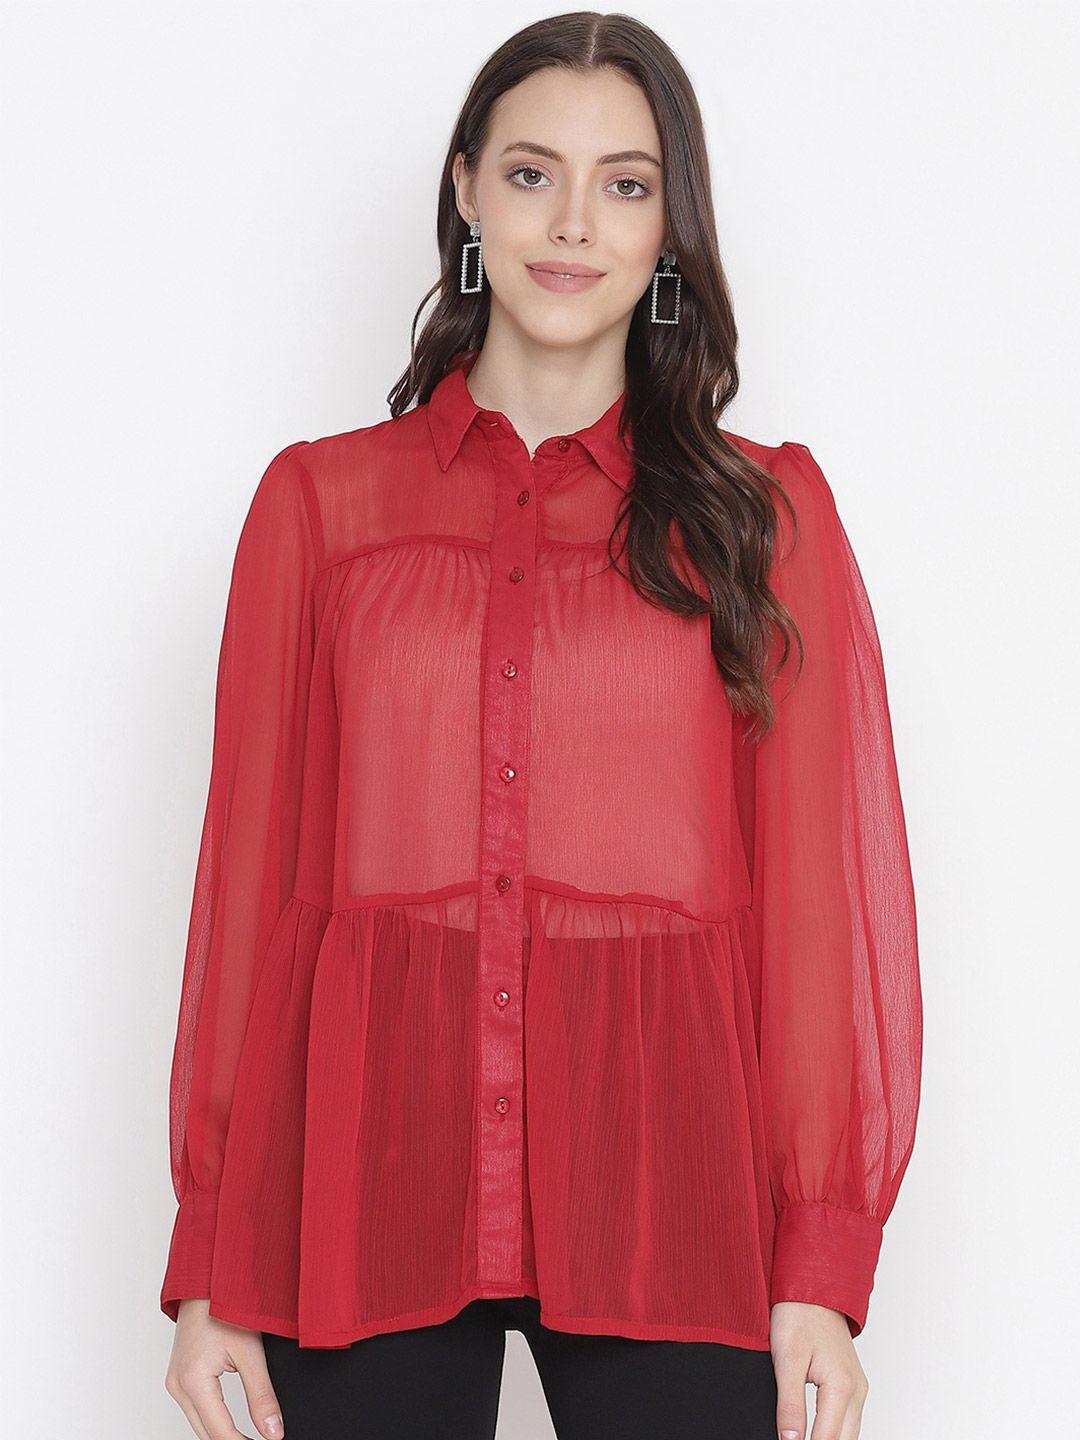 oxolloxo-women-red-solid-sheer-comfort-casual-shirt